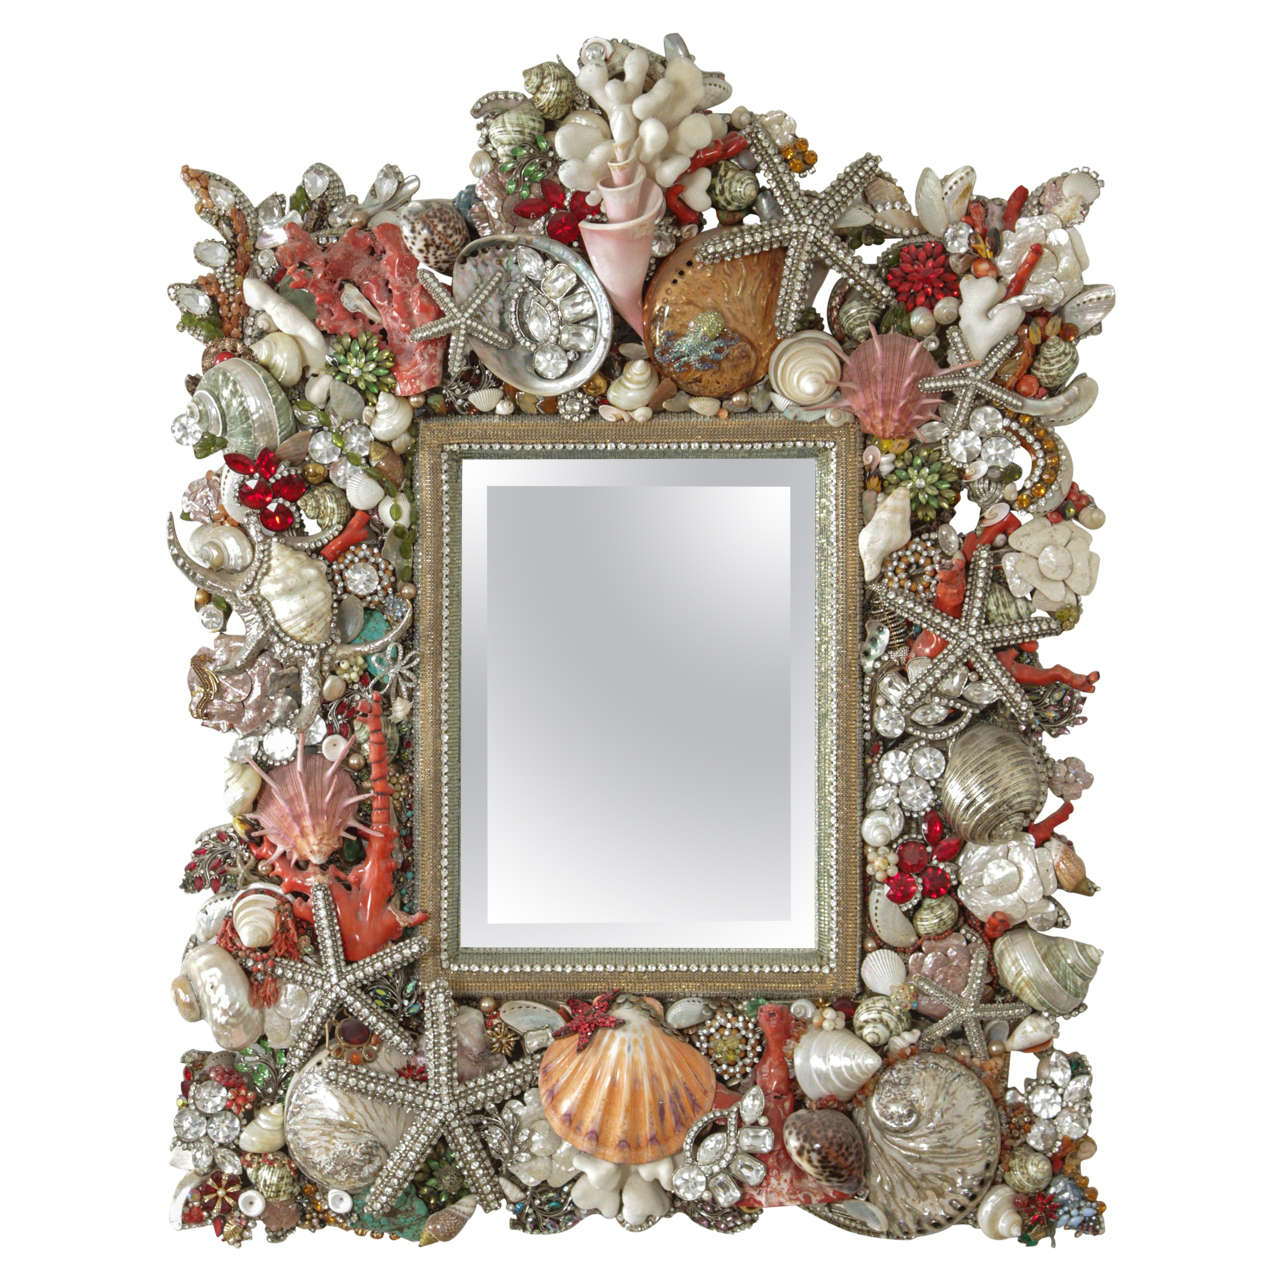 Spectacular One of a Kind  Mirror by Douglas Cloutier